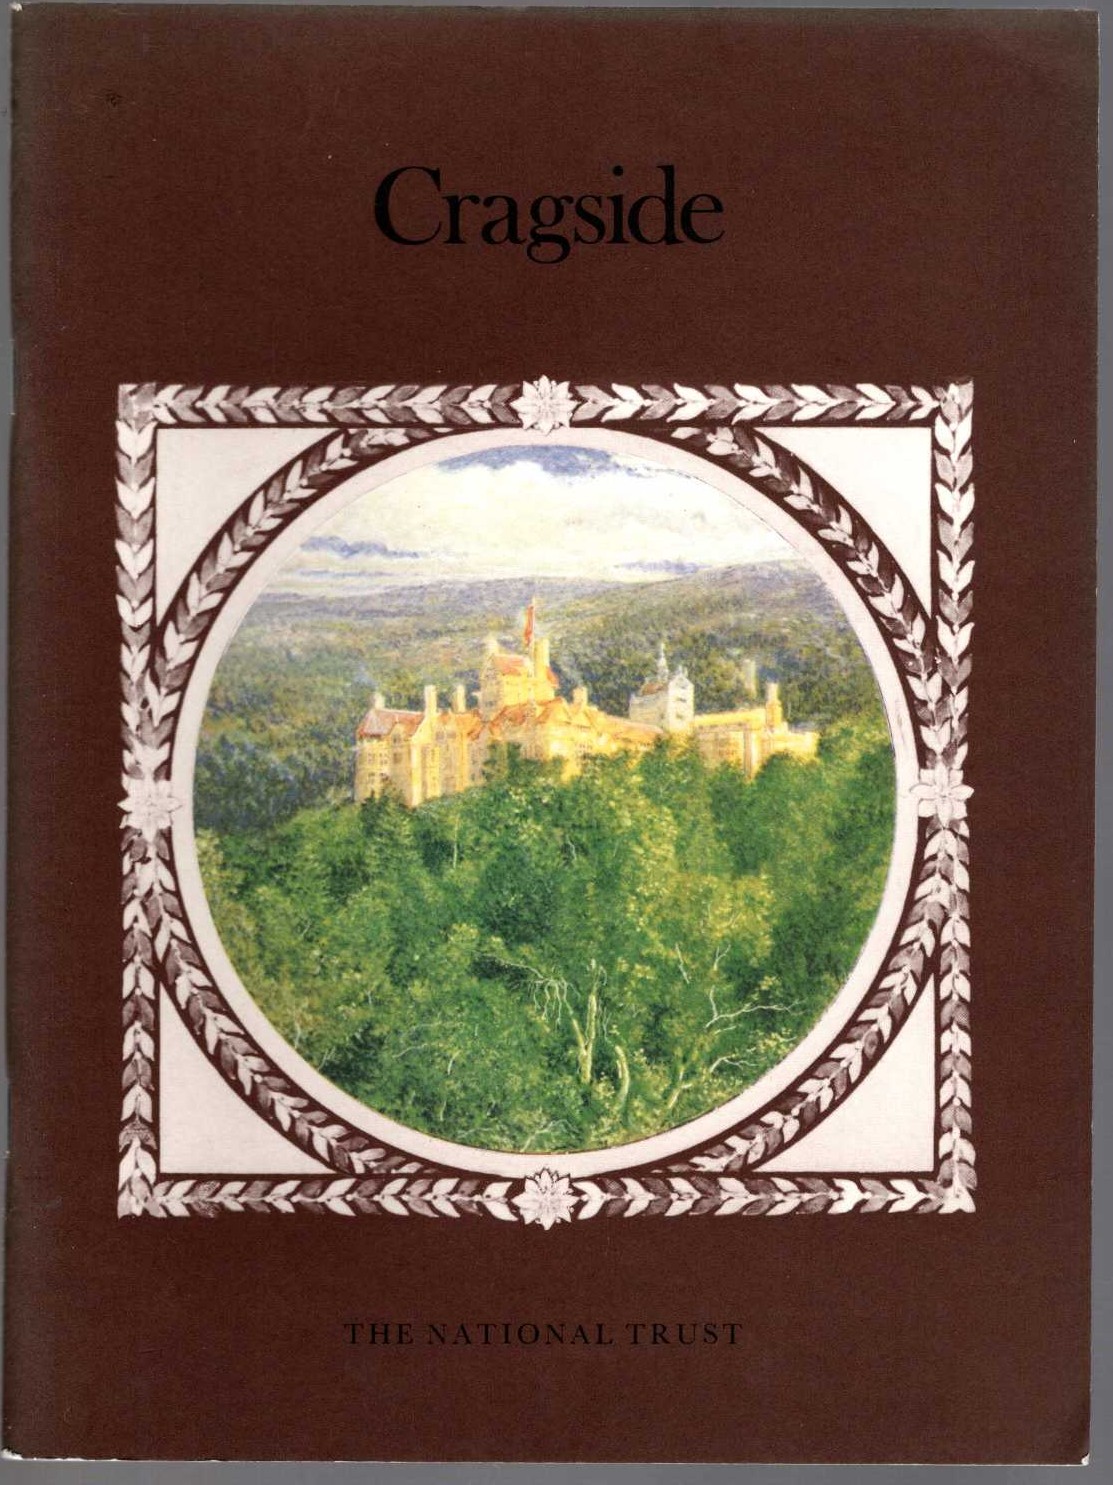 
\ CRAGSIDE by The National Trust front book cover image